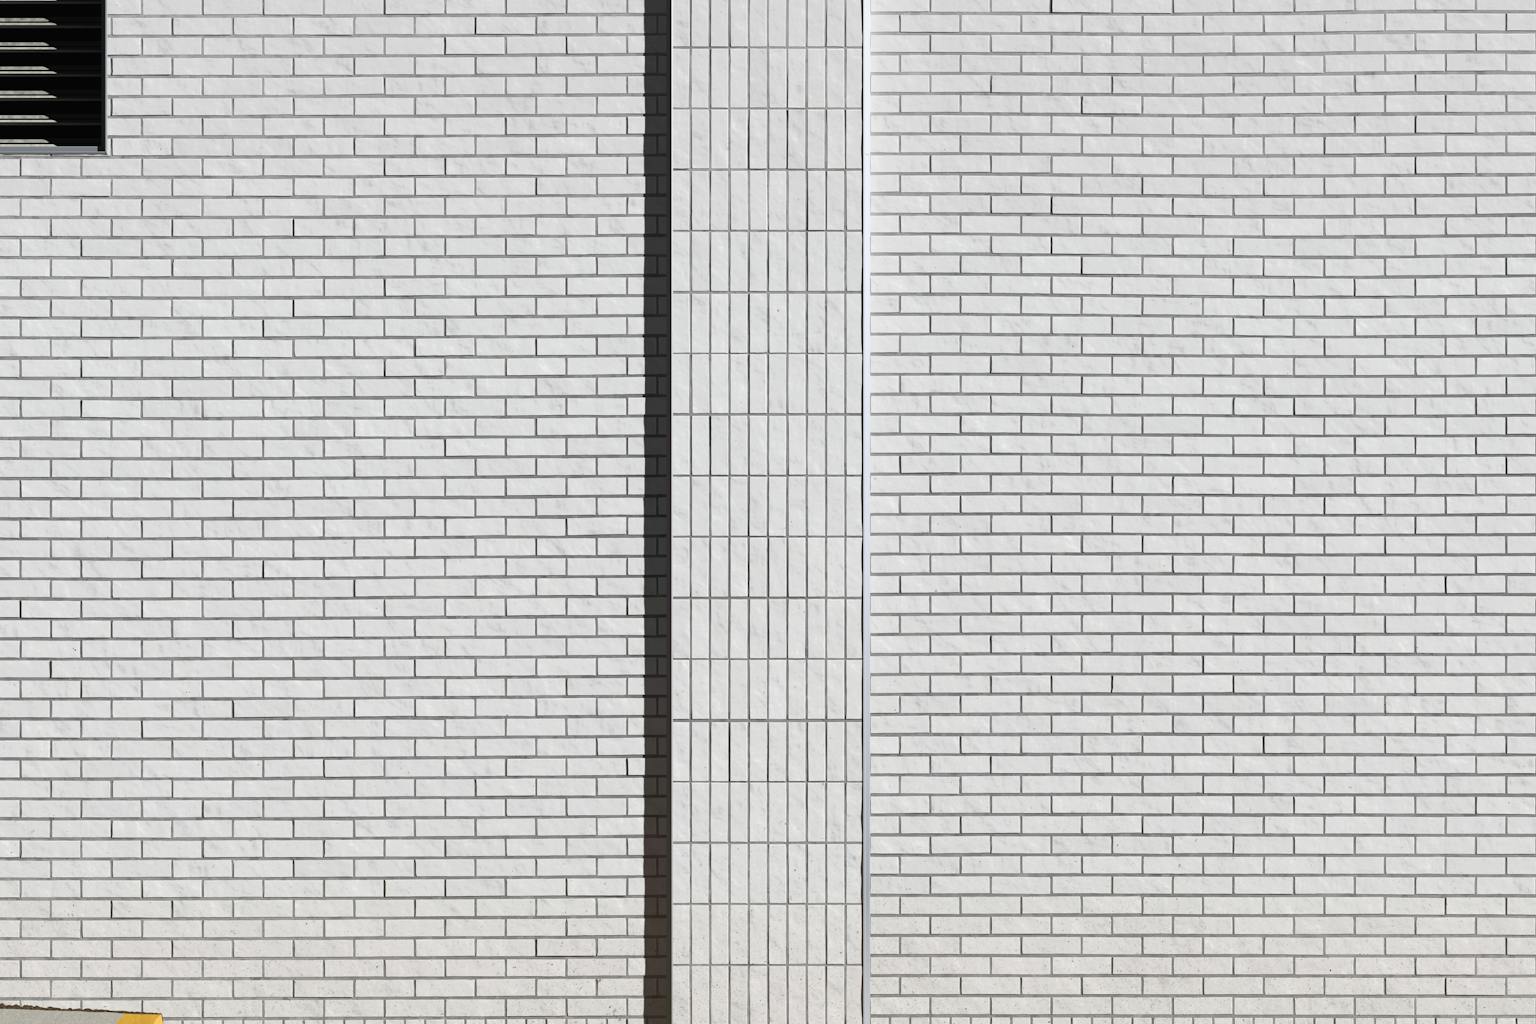 “Wall” is an algorithmic appreciation of a brick wall - everything that it is made of, everything that has been added to it or removed from it, and everything that it interacts with.